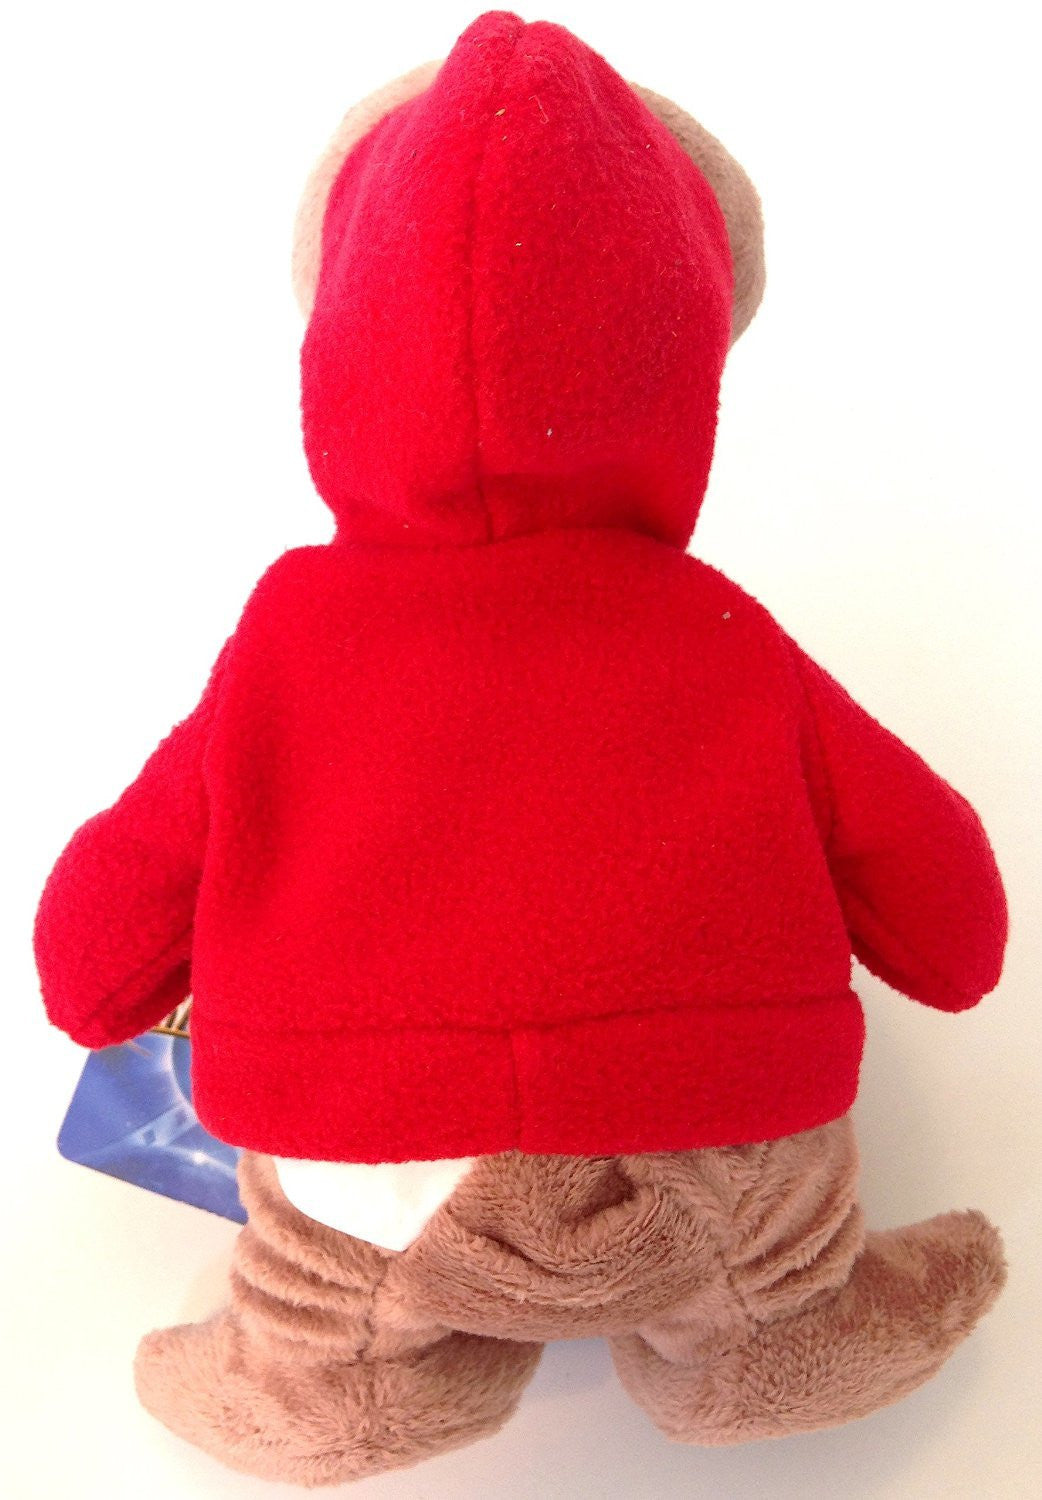 universal studios 9" E.T. extra terrestrial red sweatshirt plush toy new with tags